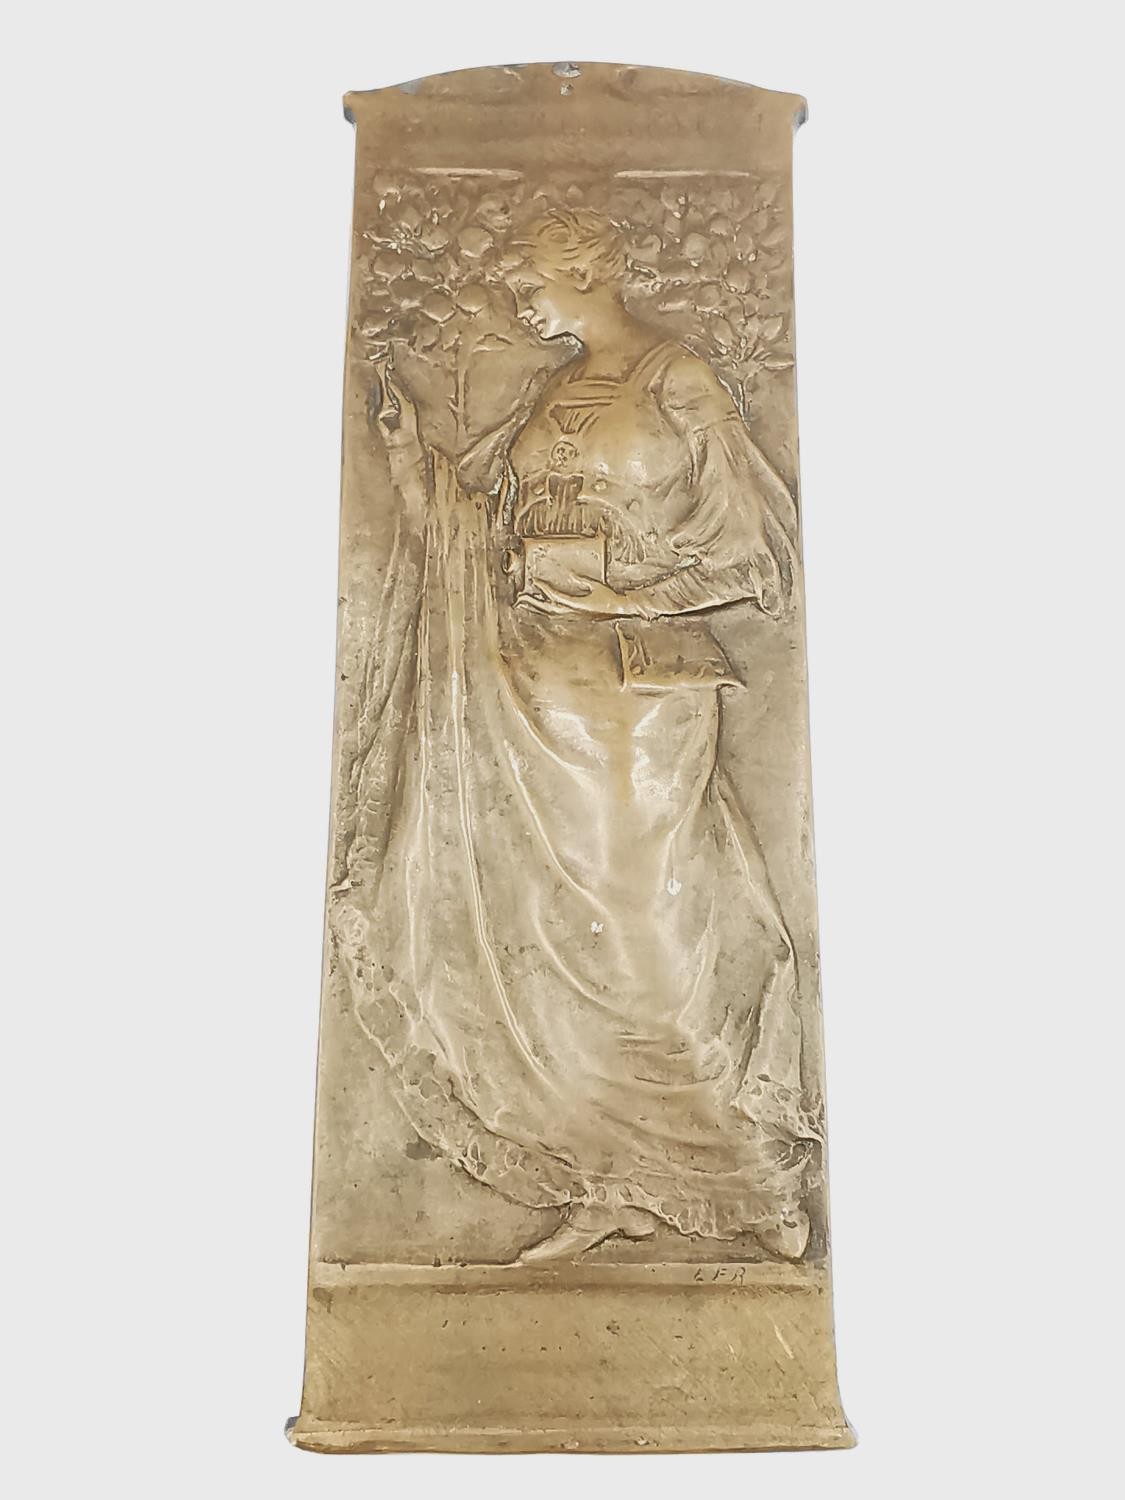 An Art Nouveau bronze relief plaque of a lady in flowing dress holding a magic lantern among blossom